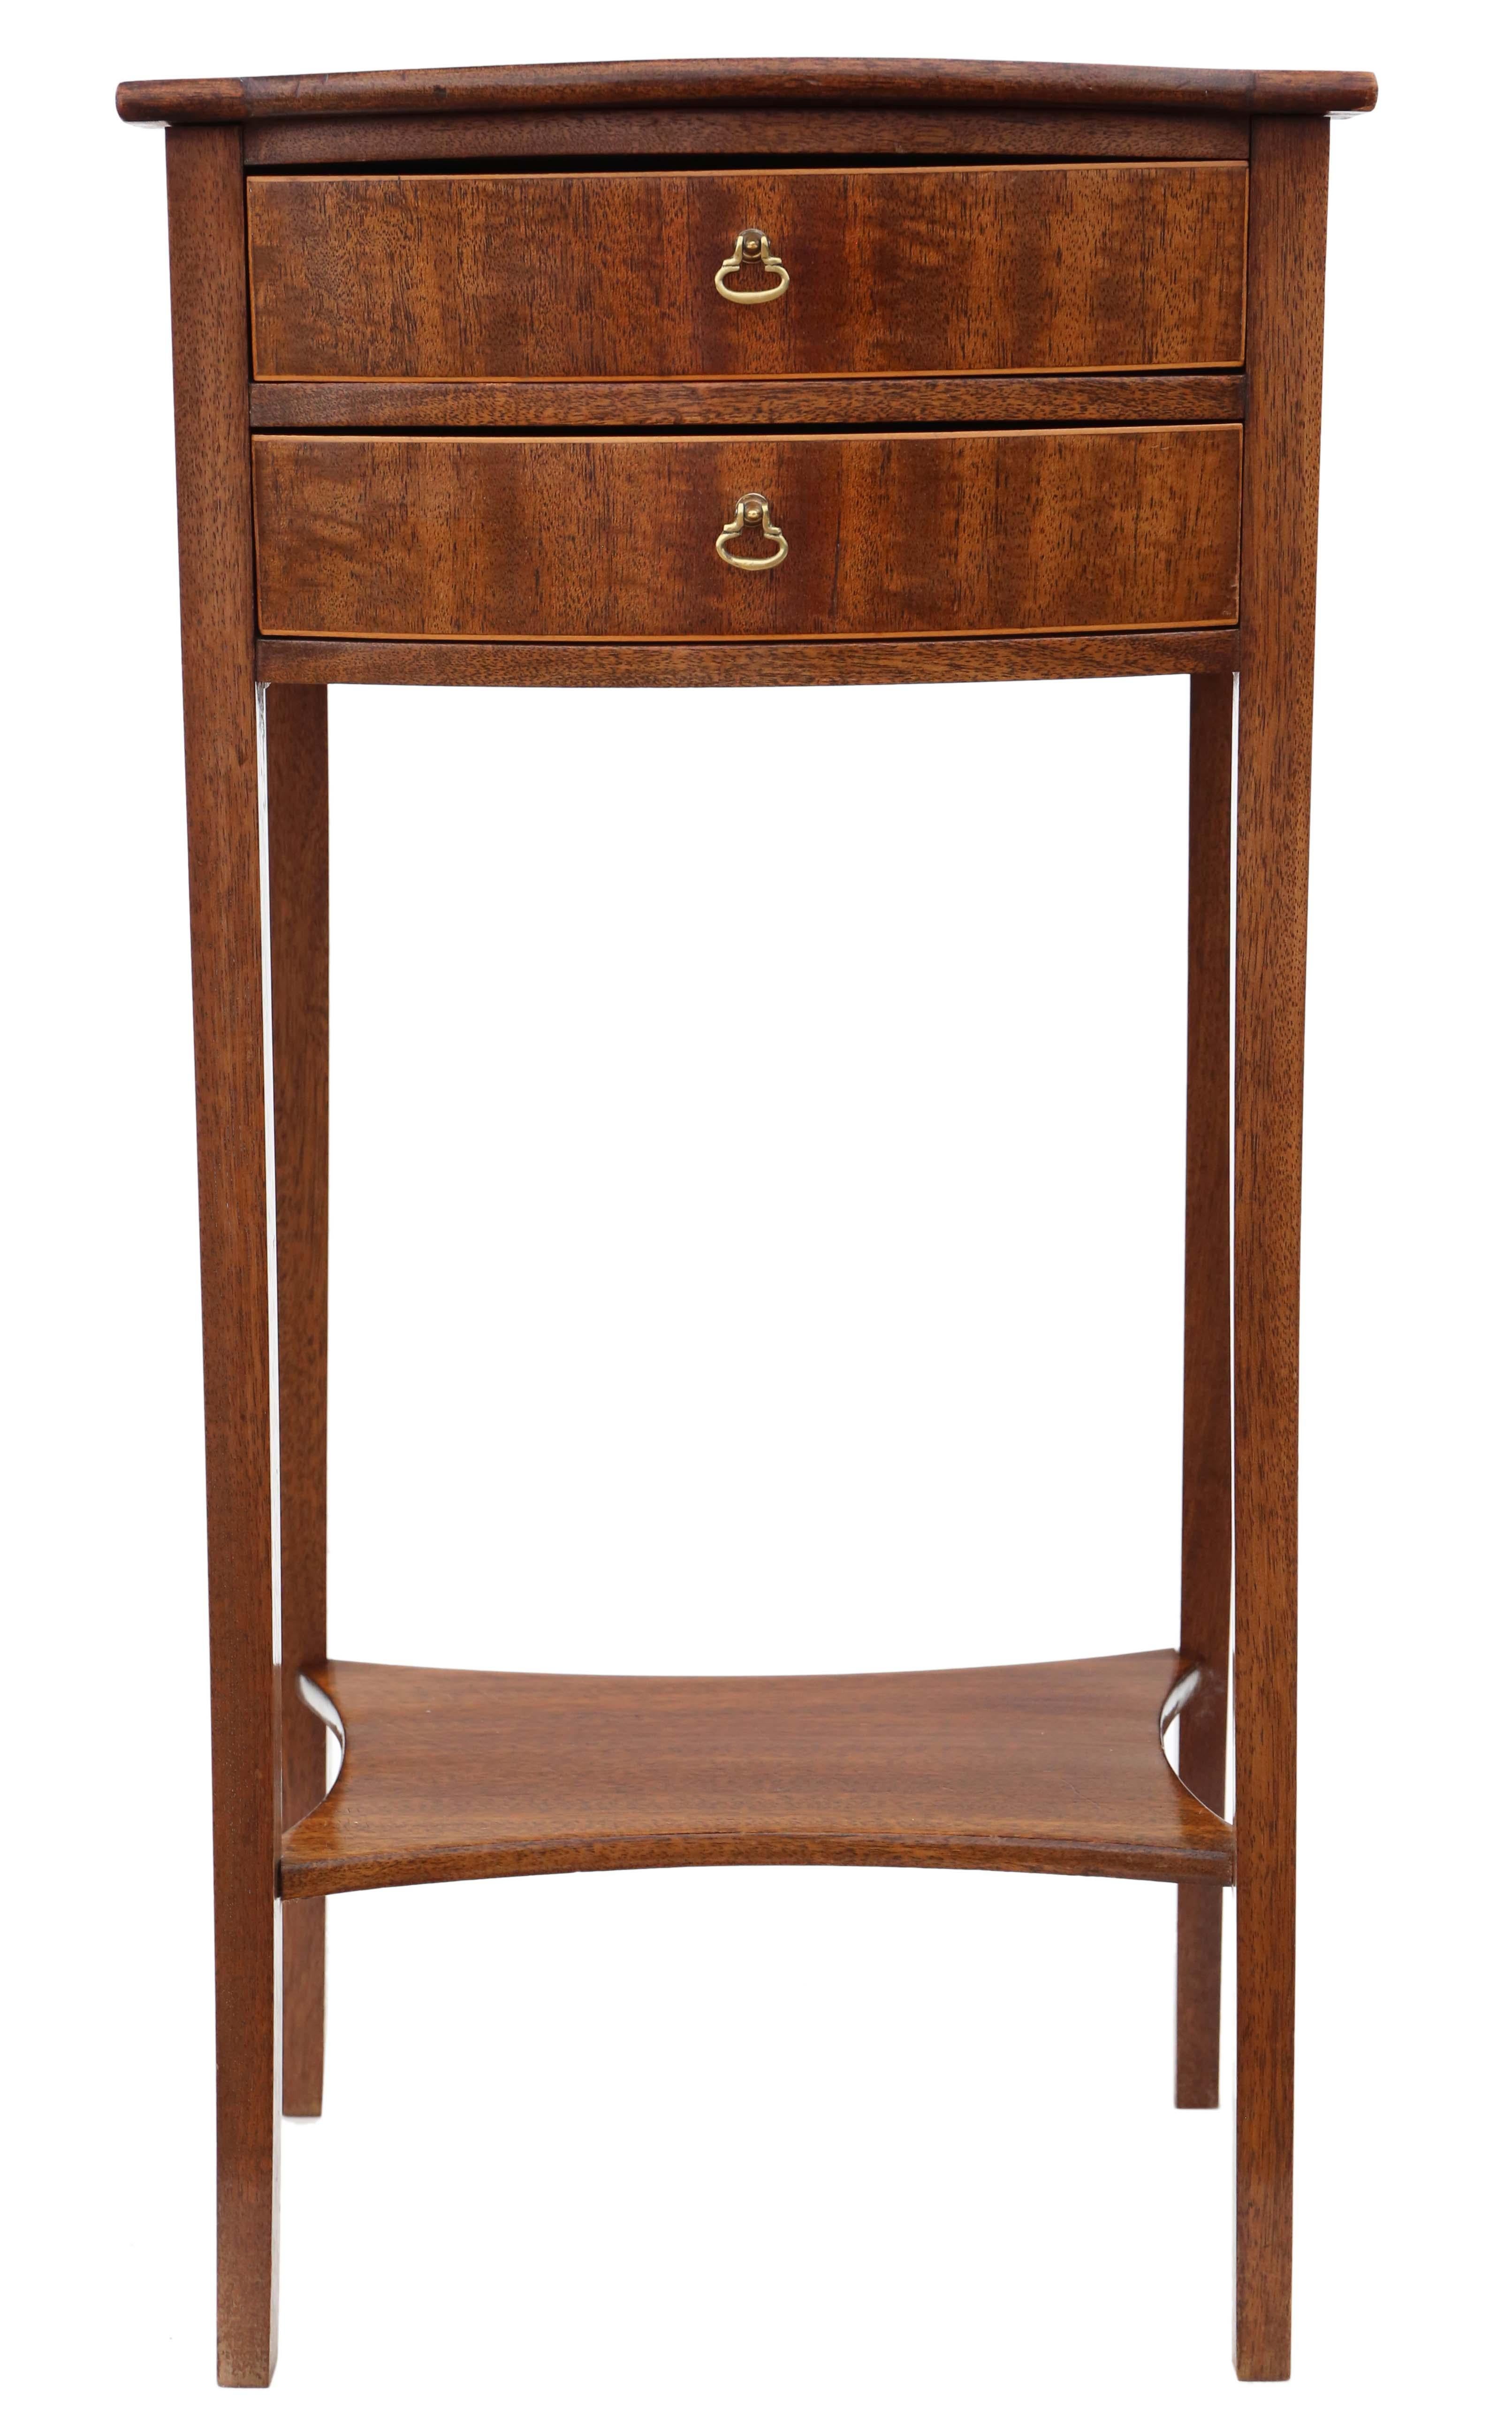 Antique fine quality Georgian revival bowfront mahogany bedside table C1910.

A fantastic piece with quality and style. Drawers slide freely.

Attractive line inlays to the edge of the drawers and shaped undertier.

No loose joints or